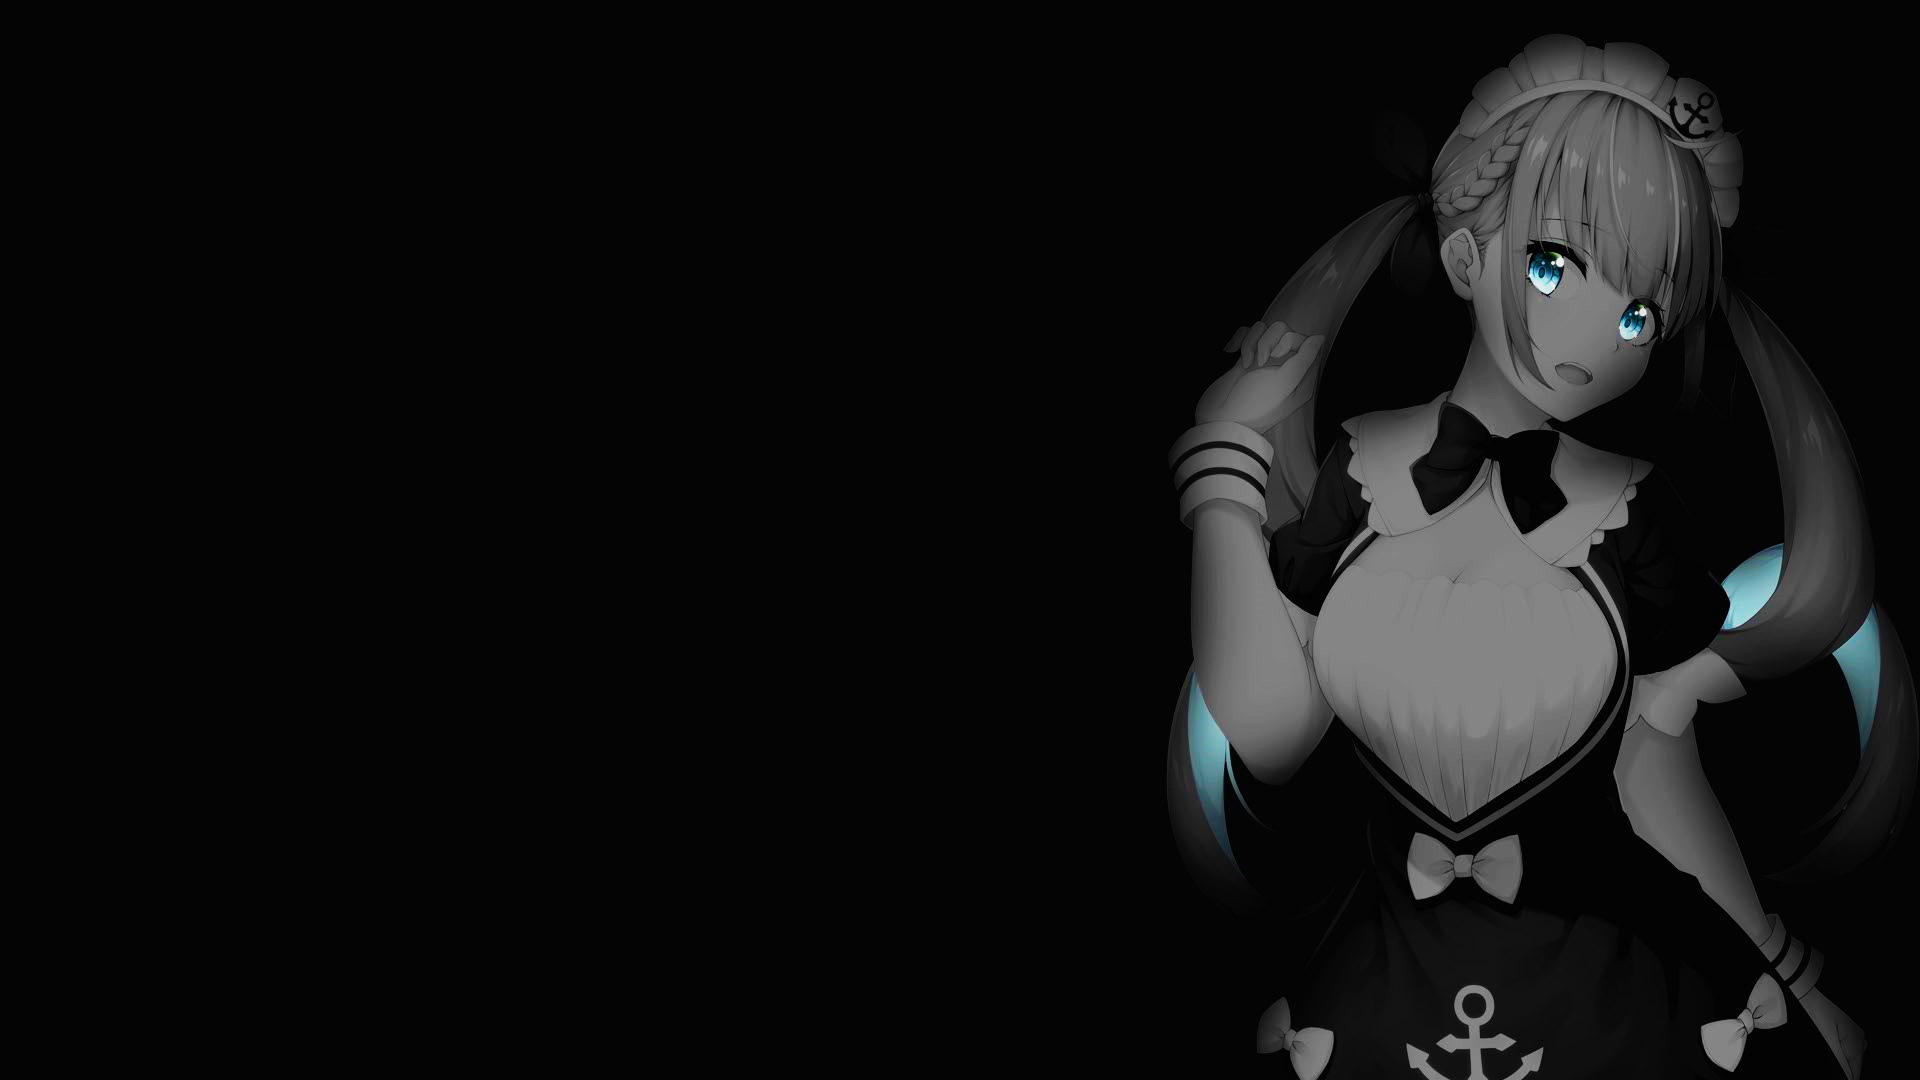 Selective Coloring Black Background Dark Background Simple Background Anime Girls Maid Outfit Maid M 1920x1080